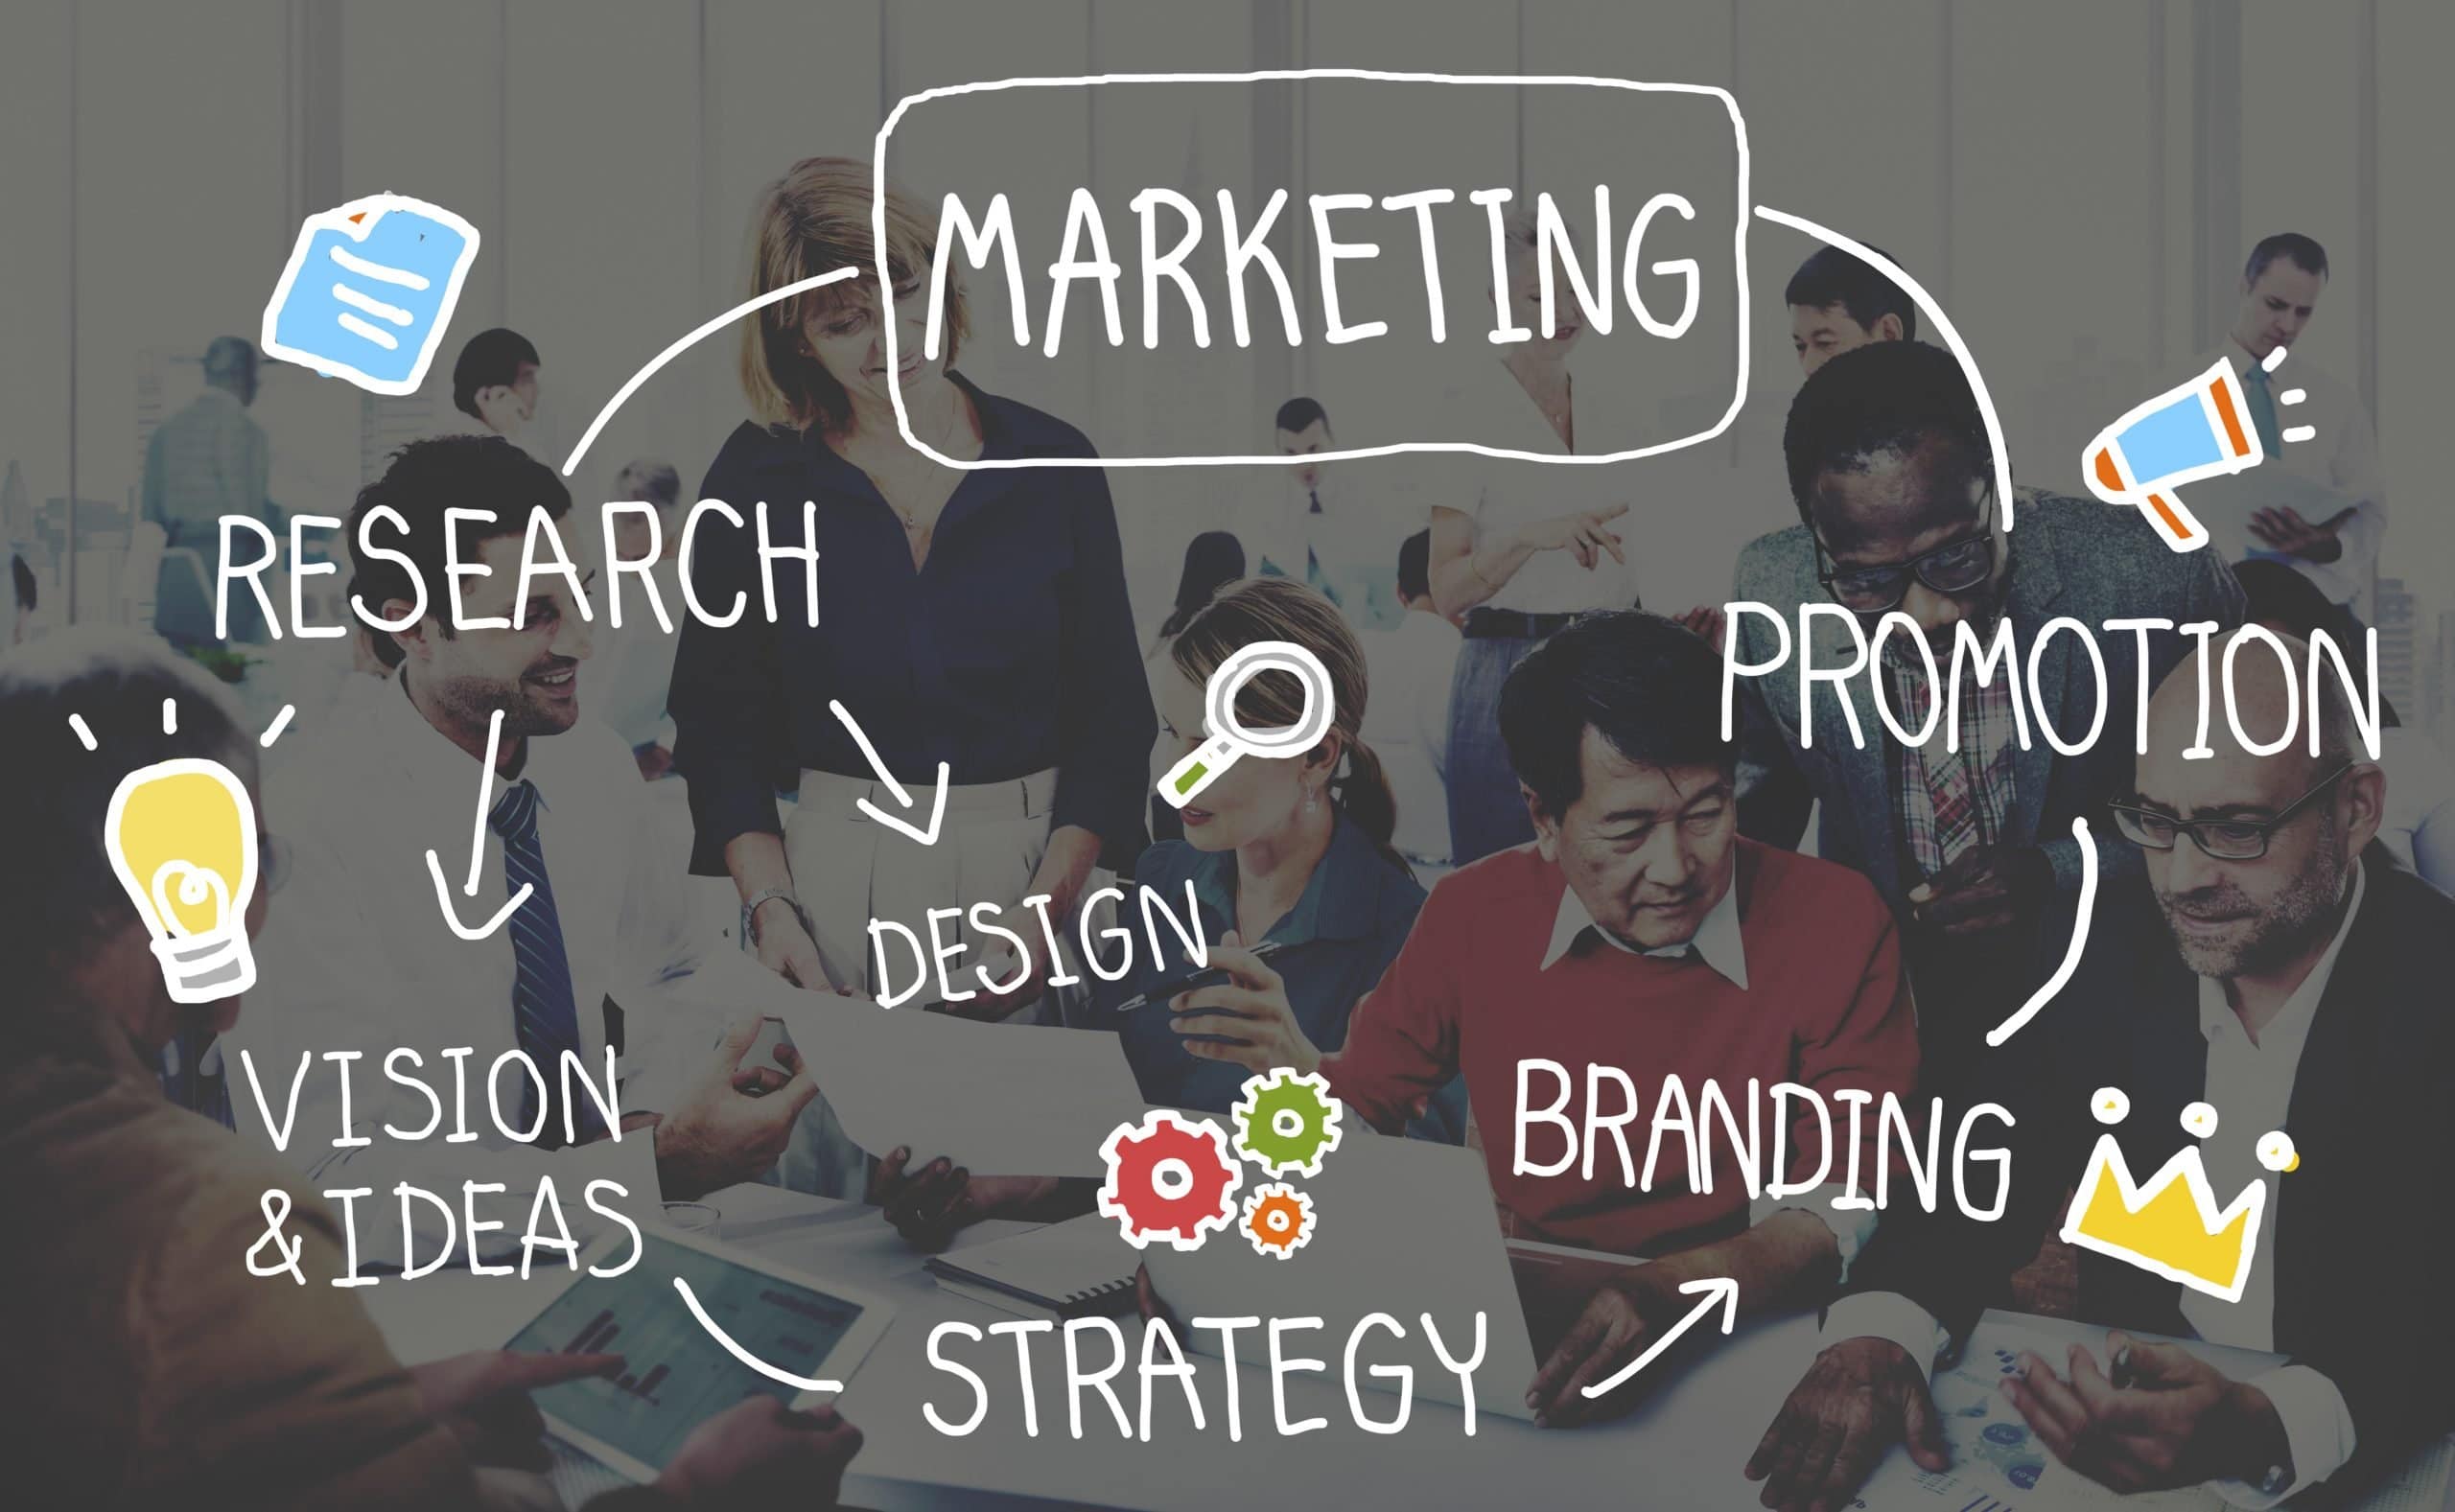 Marketing,Strategy,Business,Information,Vision,Target,Concept